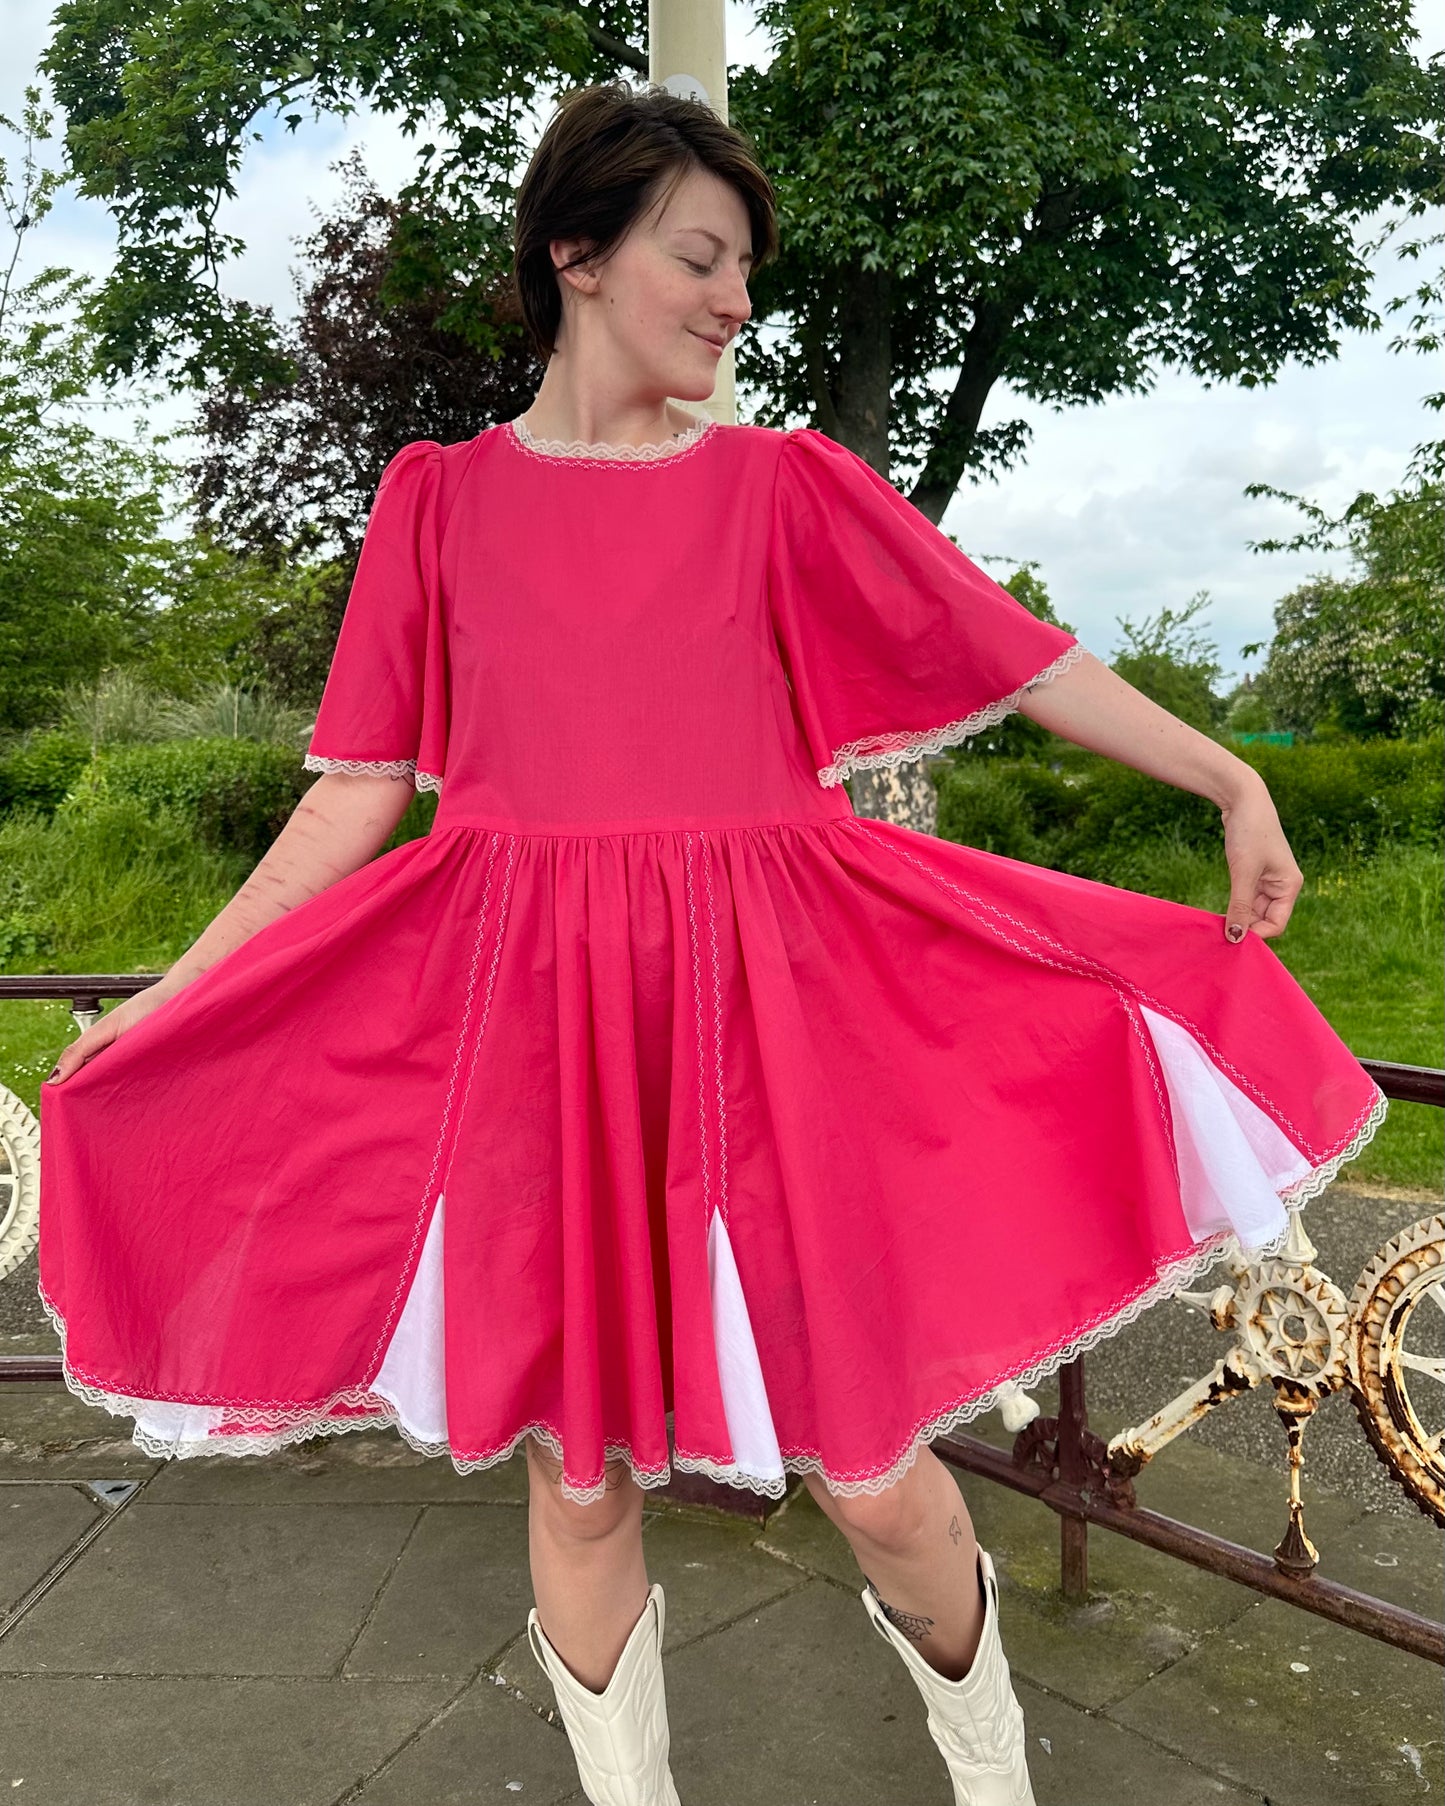 The Blythe Smock Dress in Hot Pink